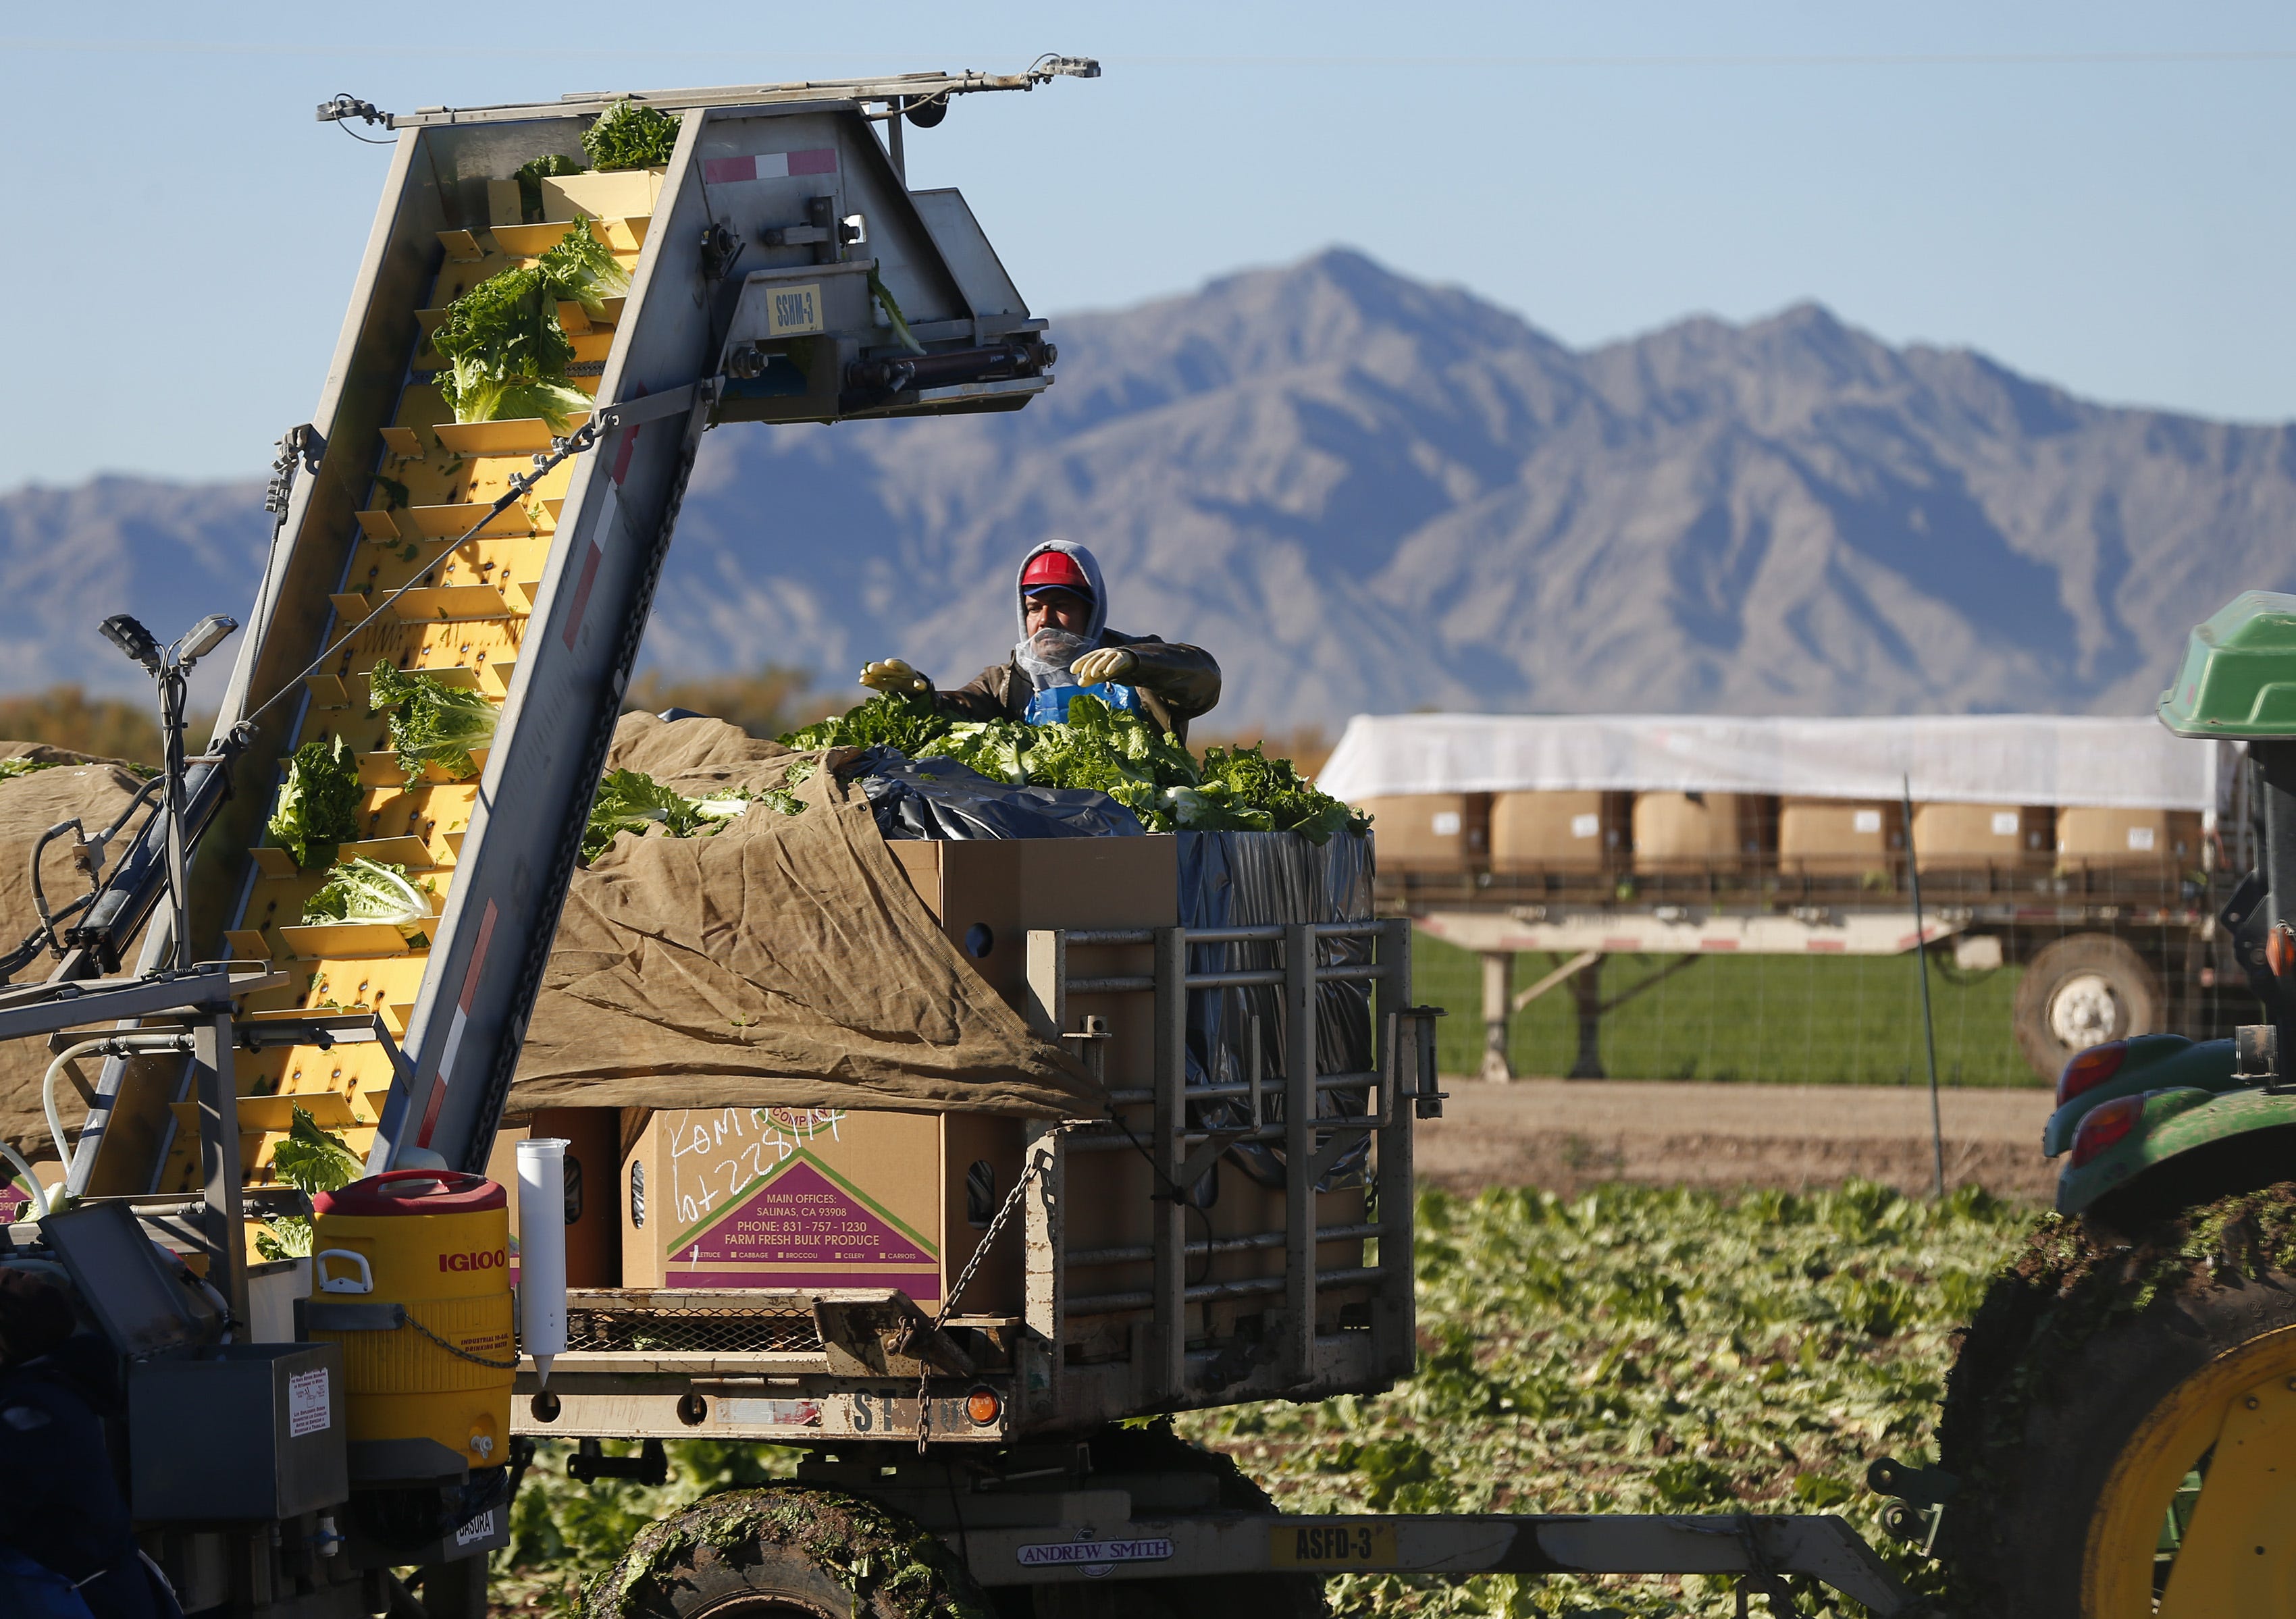 The Yuma-area growing community is fearful of FDA investigations because farm owners say they are incomplete and unreliable. The FDA says it's protecting consumers.